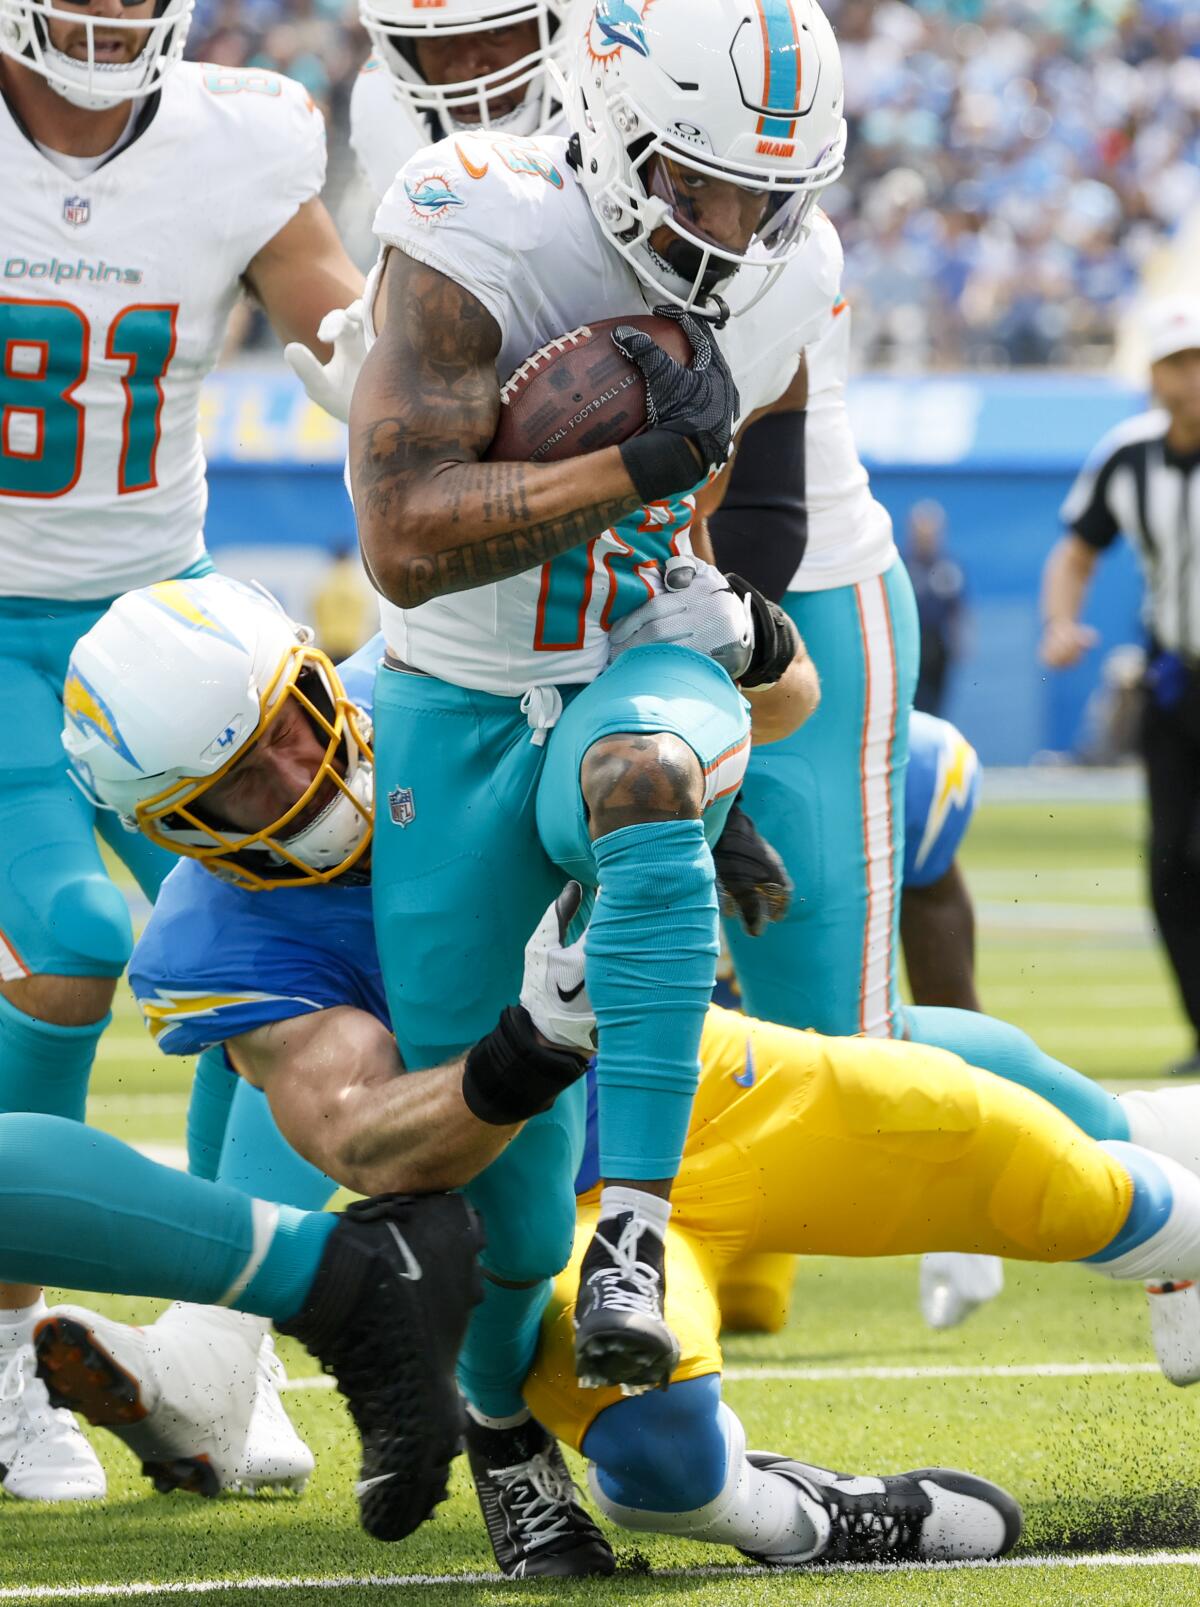 Dolphins wide receiver Erik Ezukanma (18) runs through the tackle of Chargers linebacker Joey Bosa.